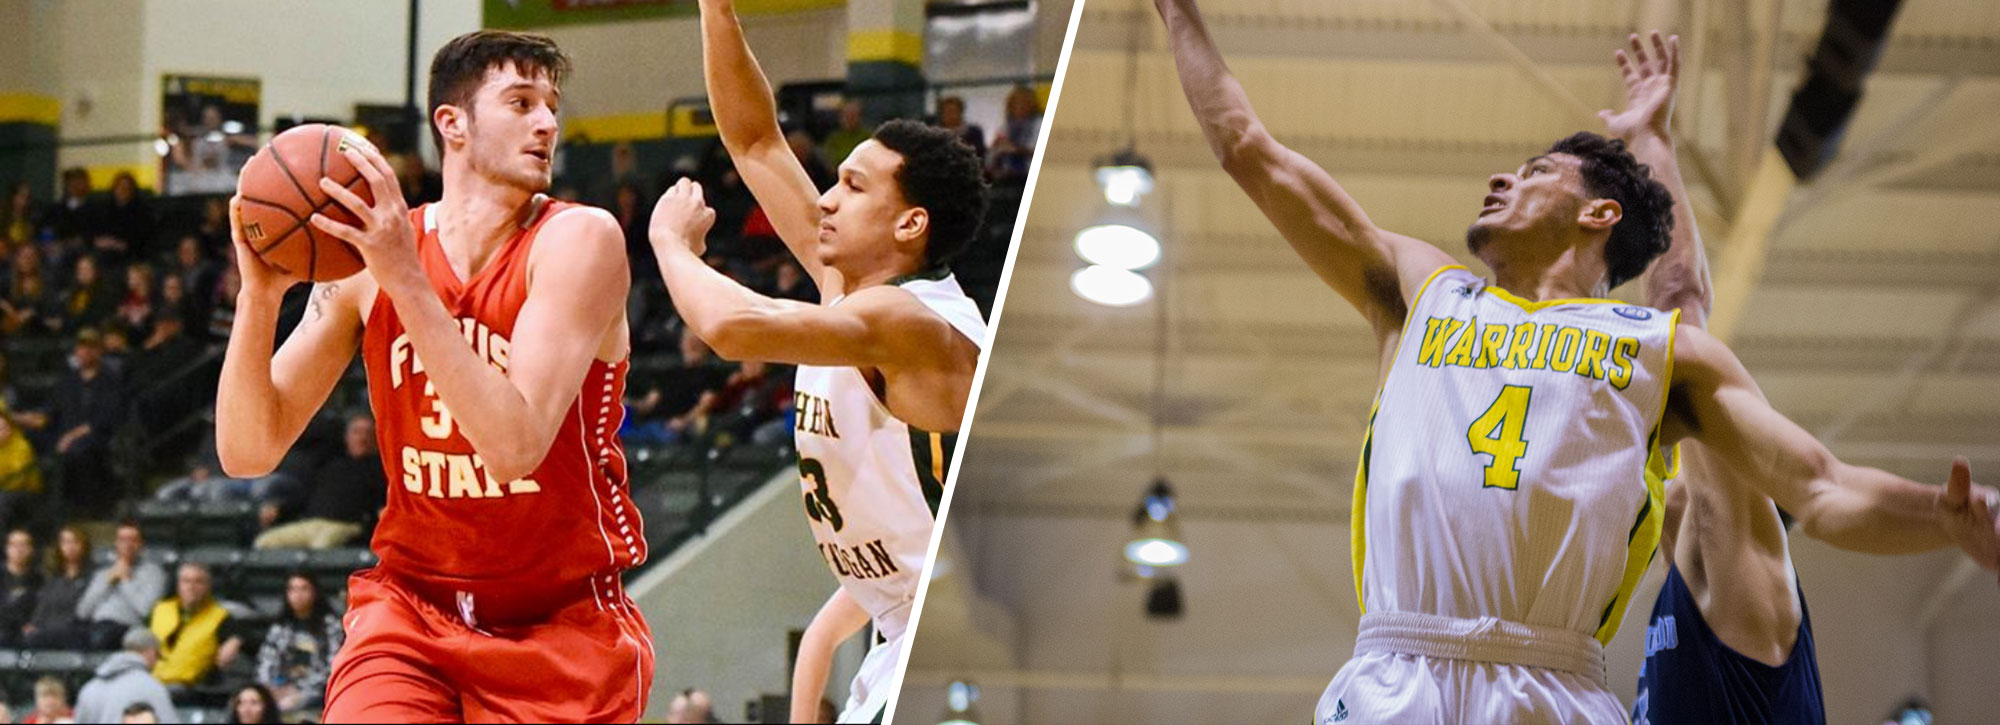 Ferris State's Hankins, Wayne State's Moore Collect GLIAC Player of the Week Honors